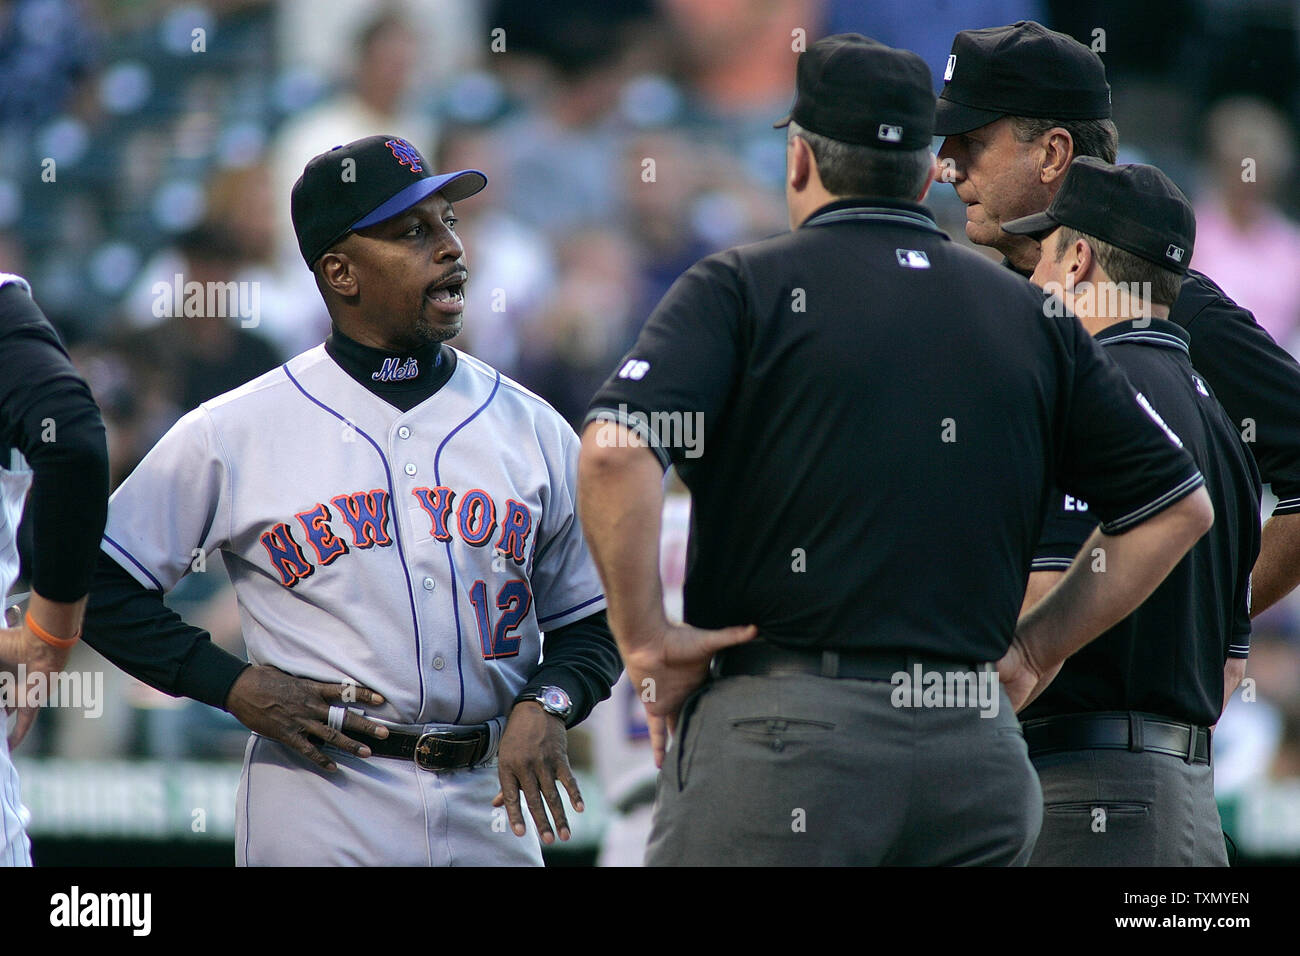 New York Mets manager Willie Randolph (L) talks to umpires (L-R) Bill Welke, Tim McClelland, and Marty Foster prior to the start of the game against the Colorado Rockies at Coors Field in Denver August 29, 2006.  (UPI Photos/Gary C. Caskey) Stock Photo